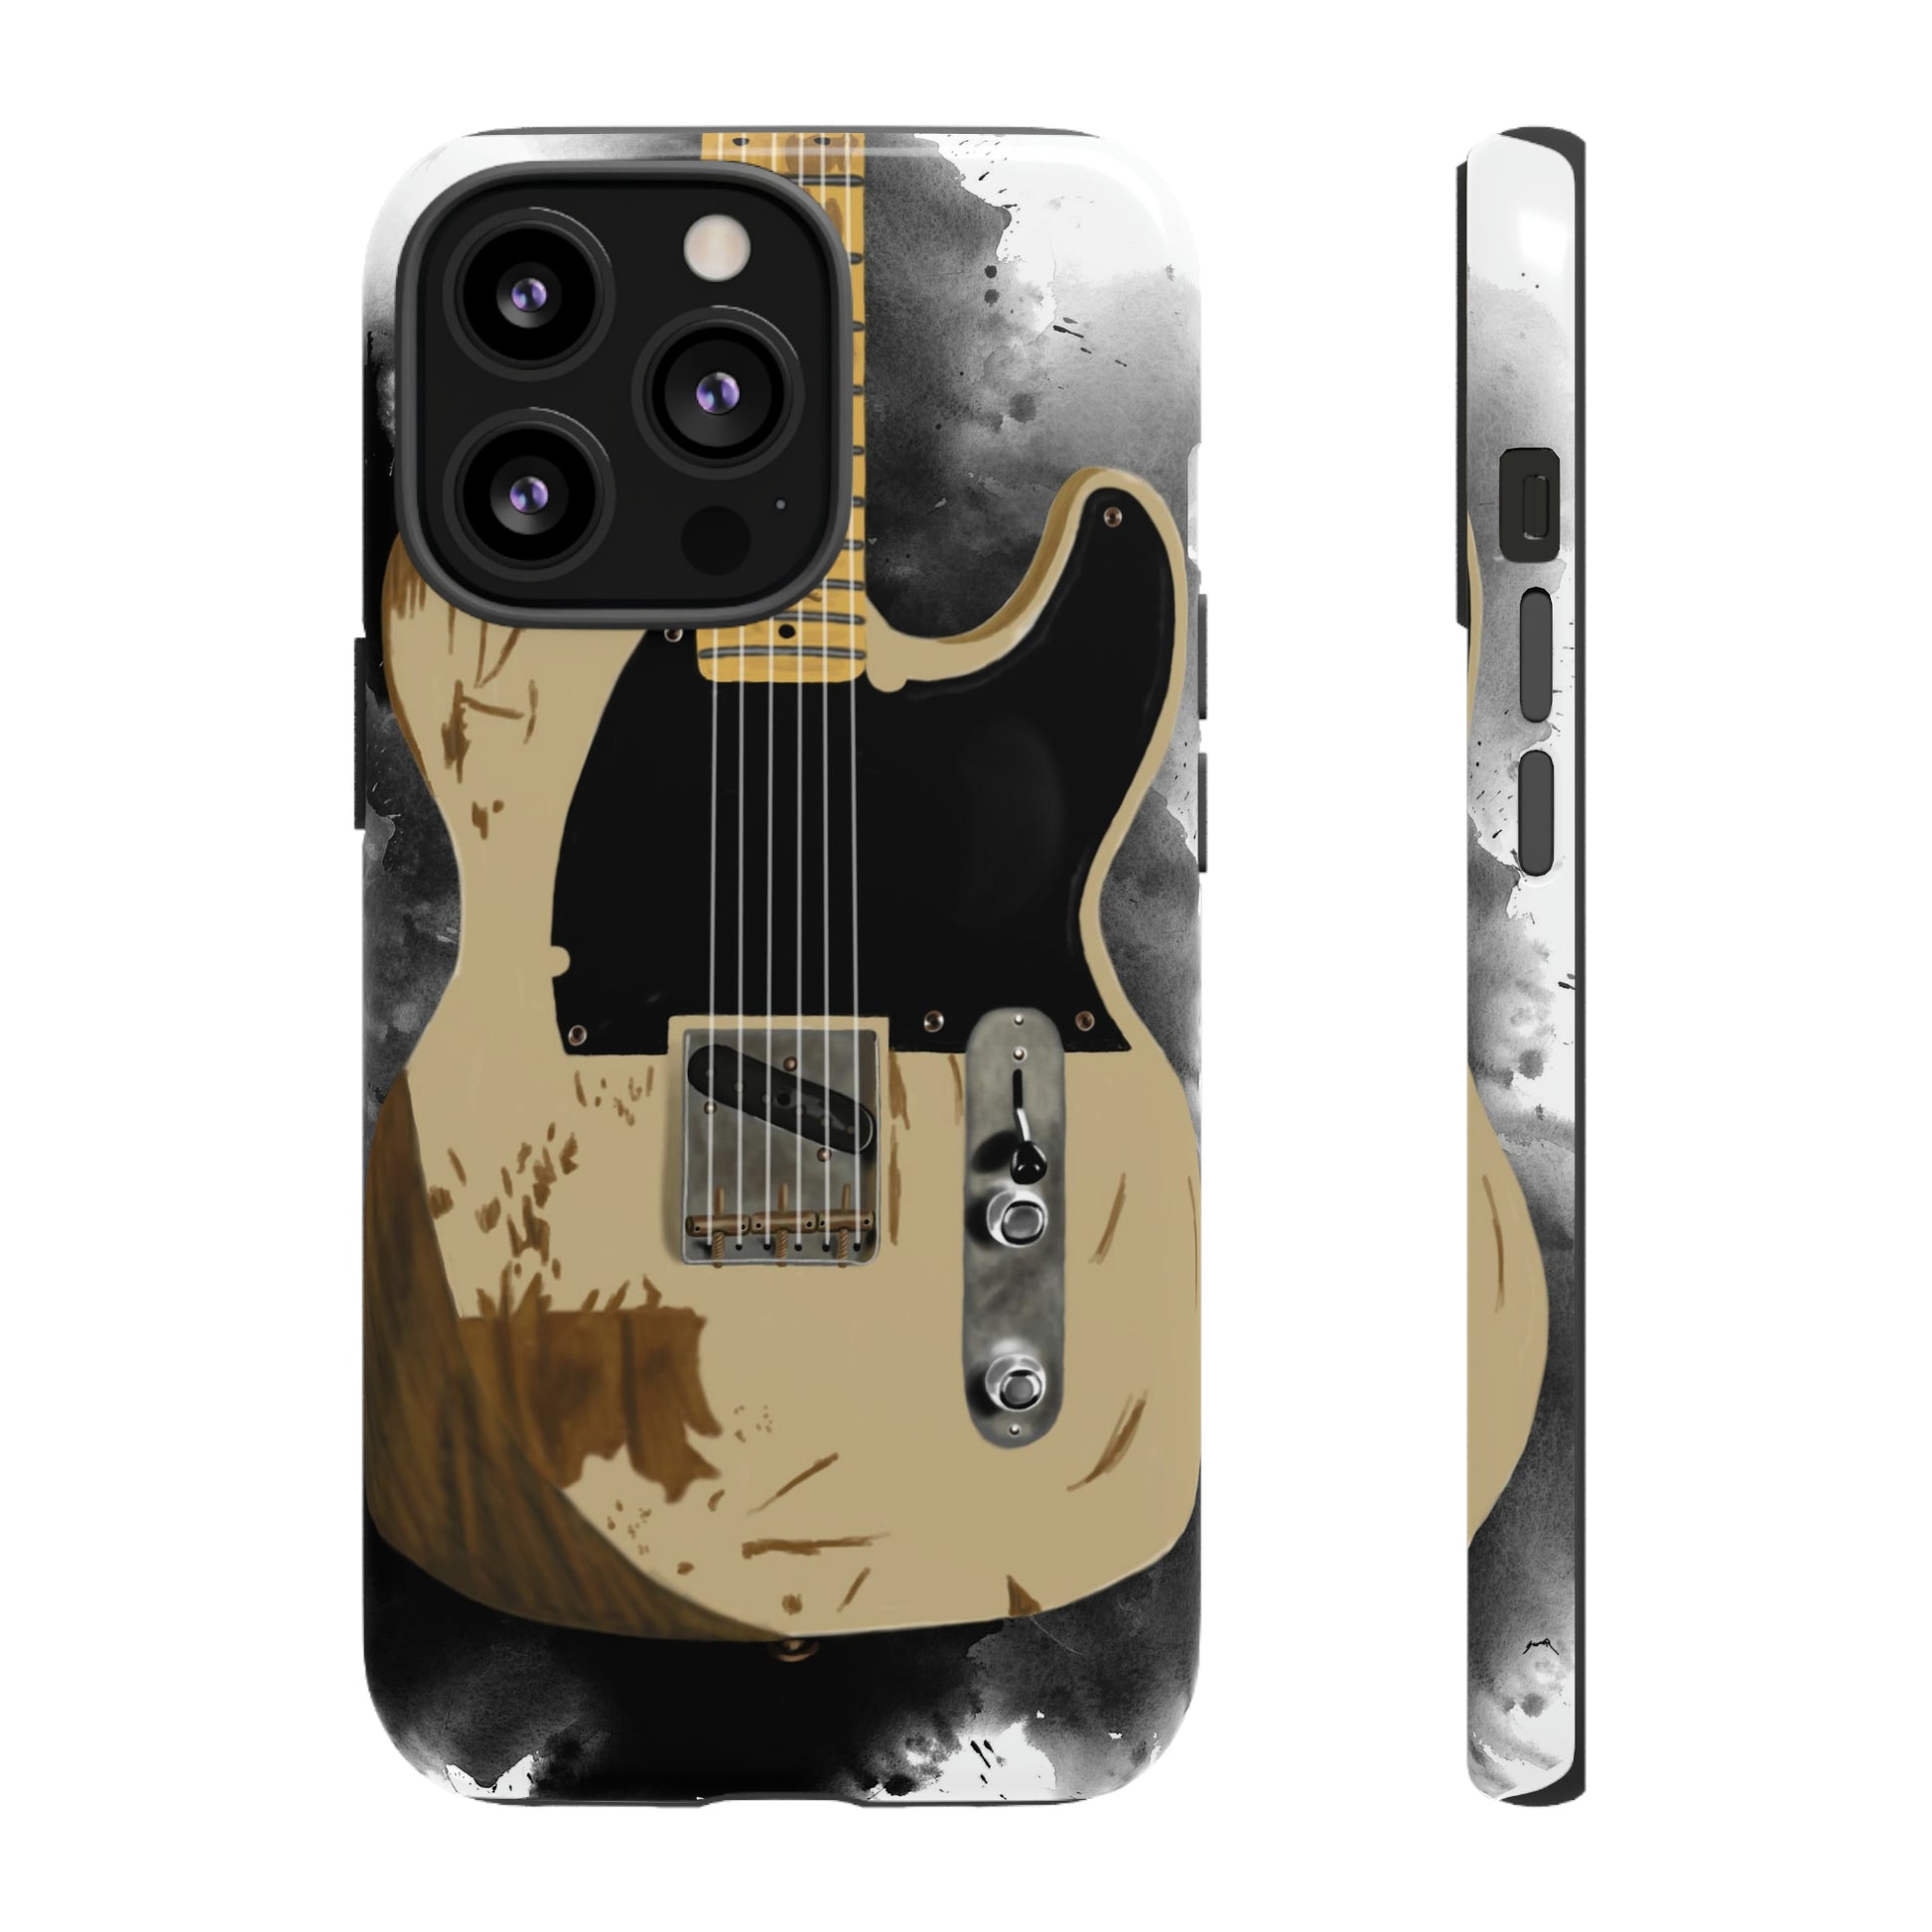 Digital painting of a white-black vintage electric guitar printed on an iphone phone case